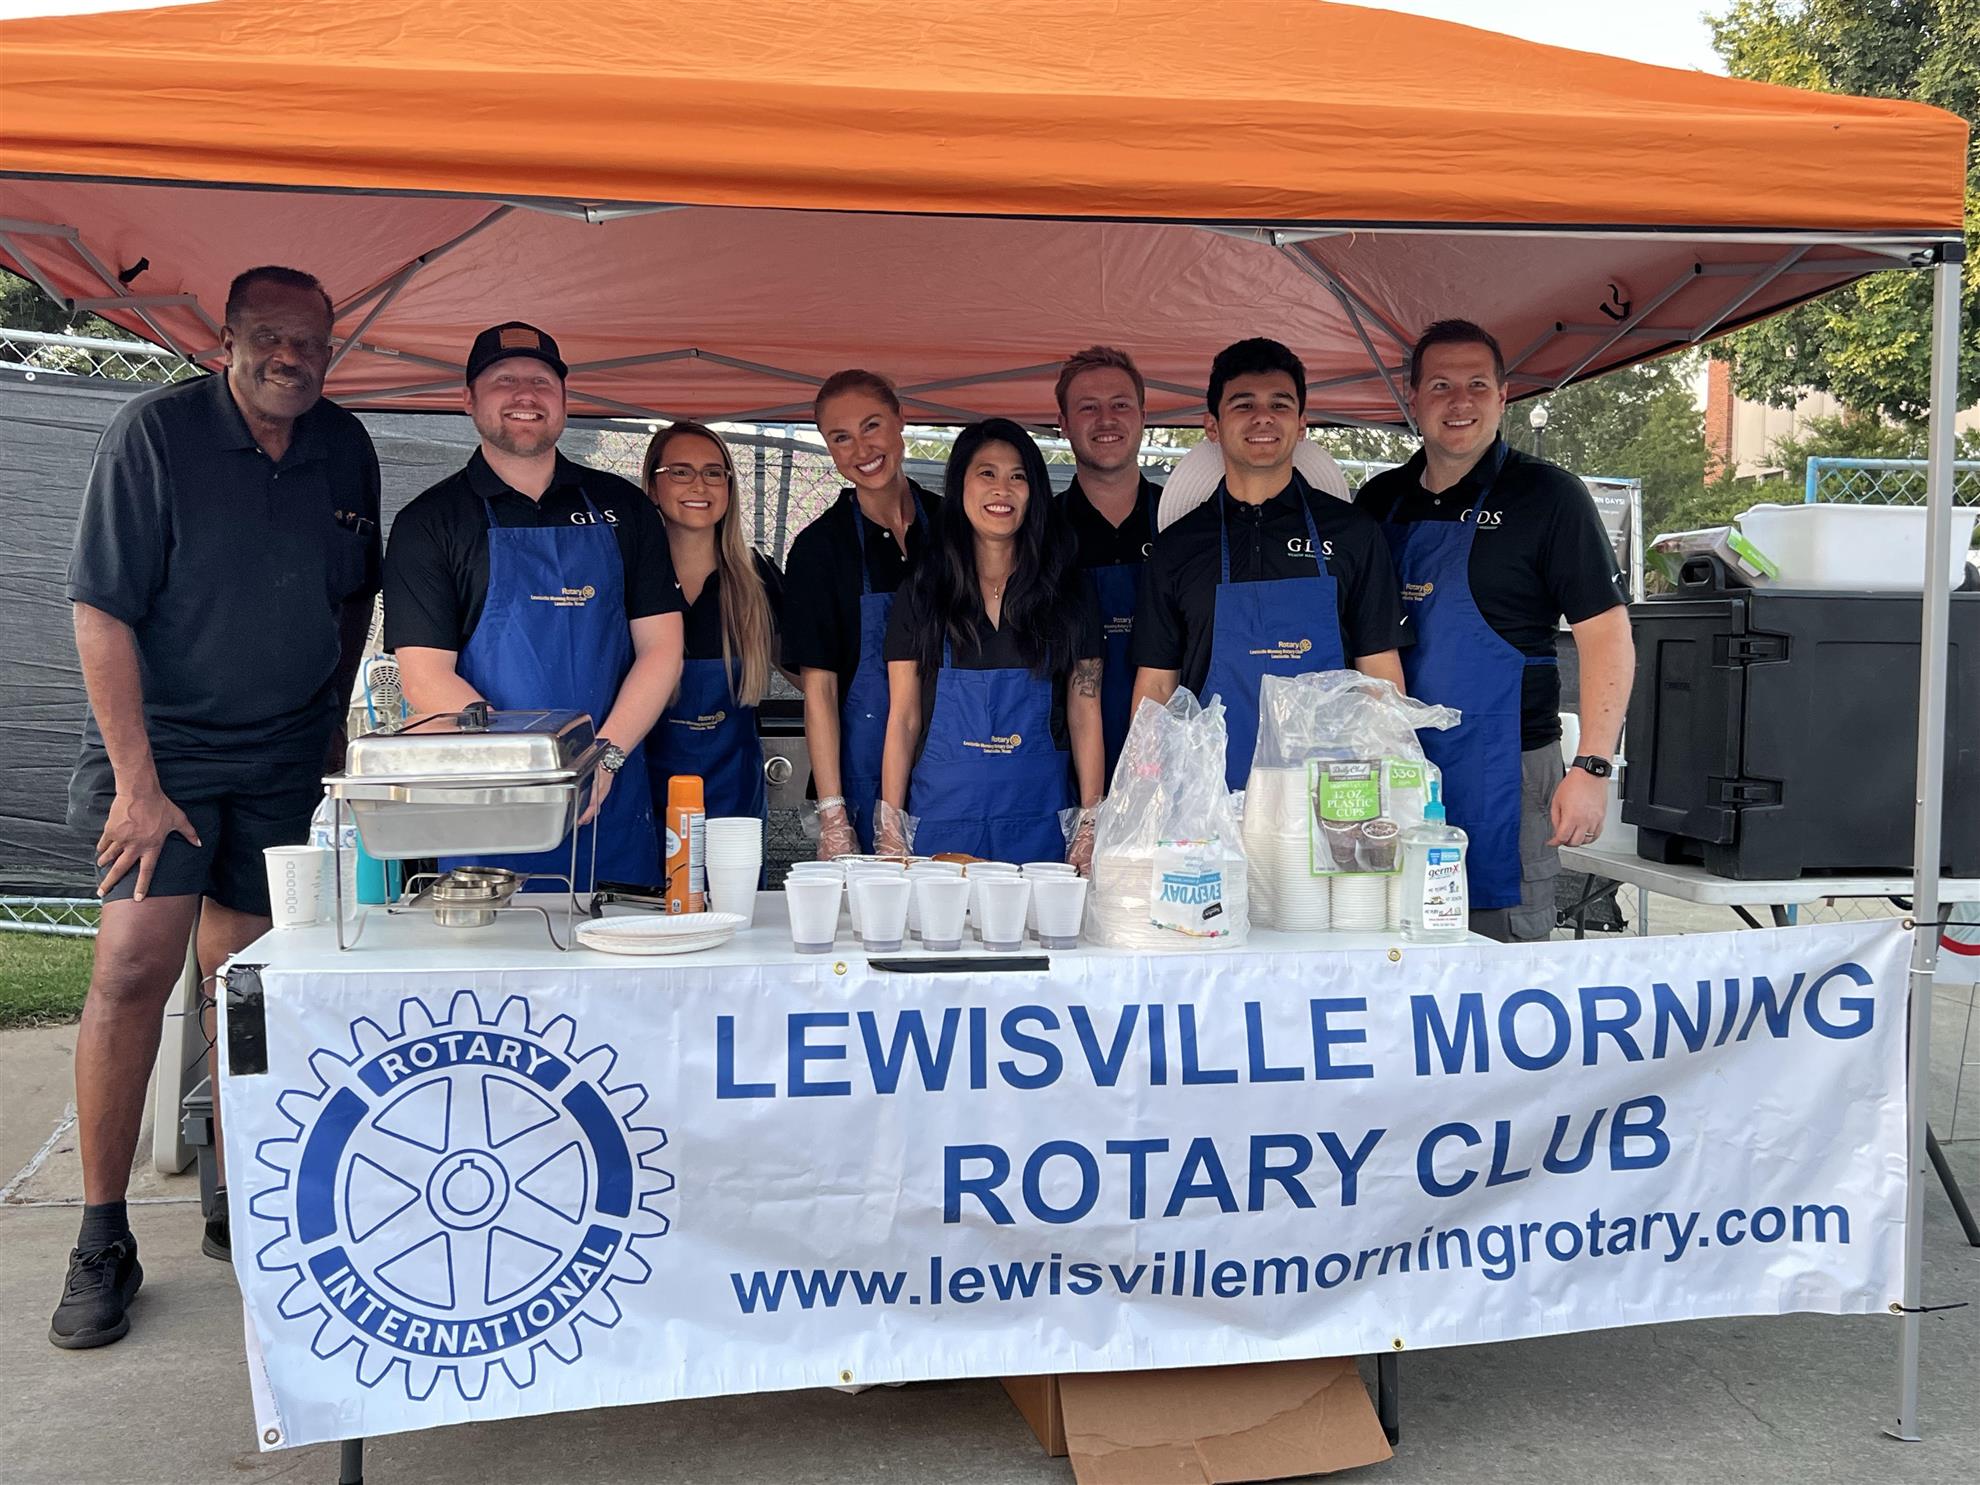 Lewisville Morning Rotary participated in the 2022 Central ES Carnival